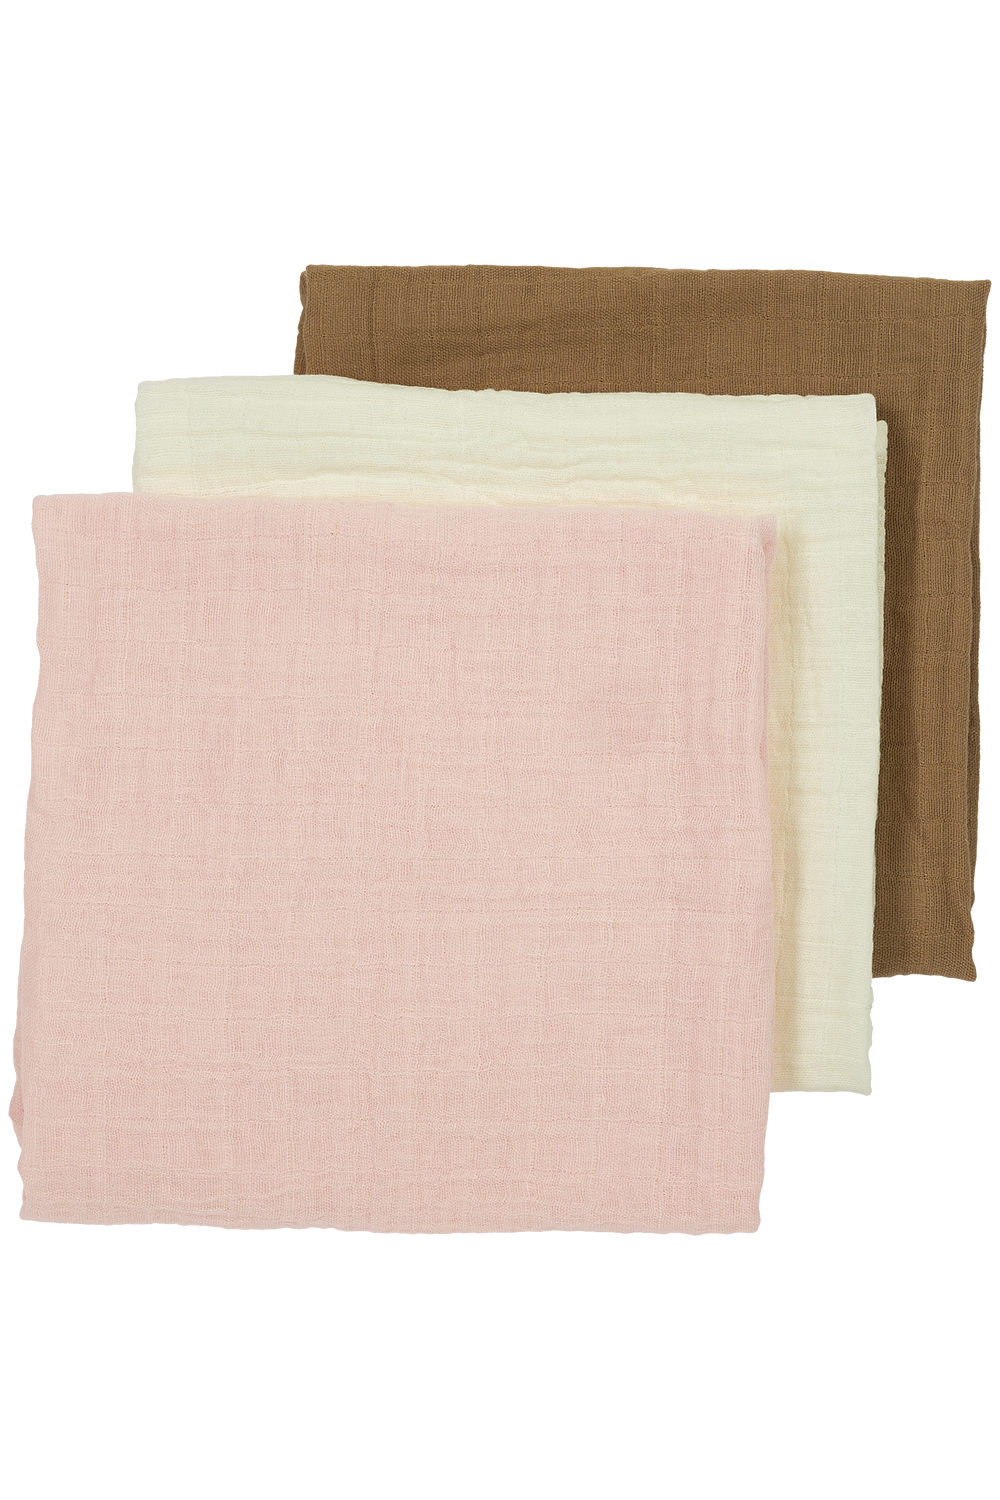 Muslin squares 3-pack Uni - offwhite/soft pink/toffee - 70x70cm